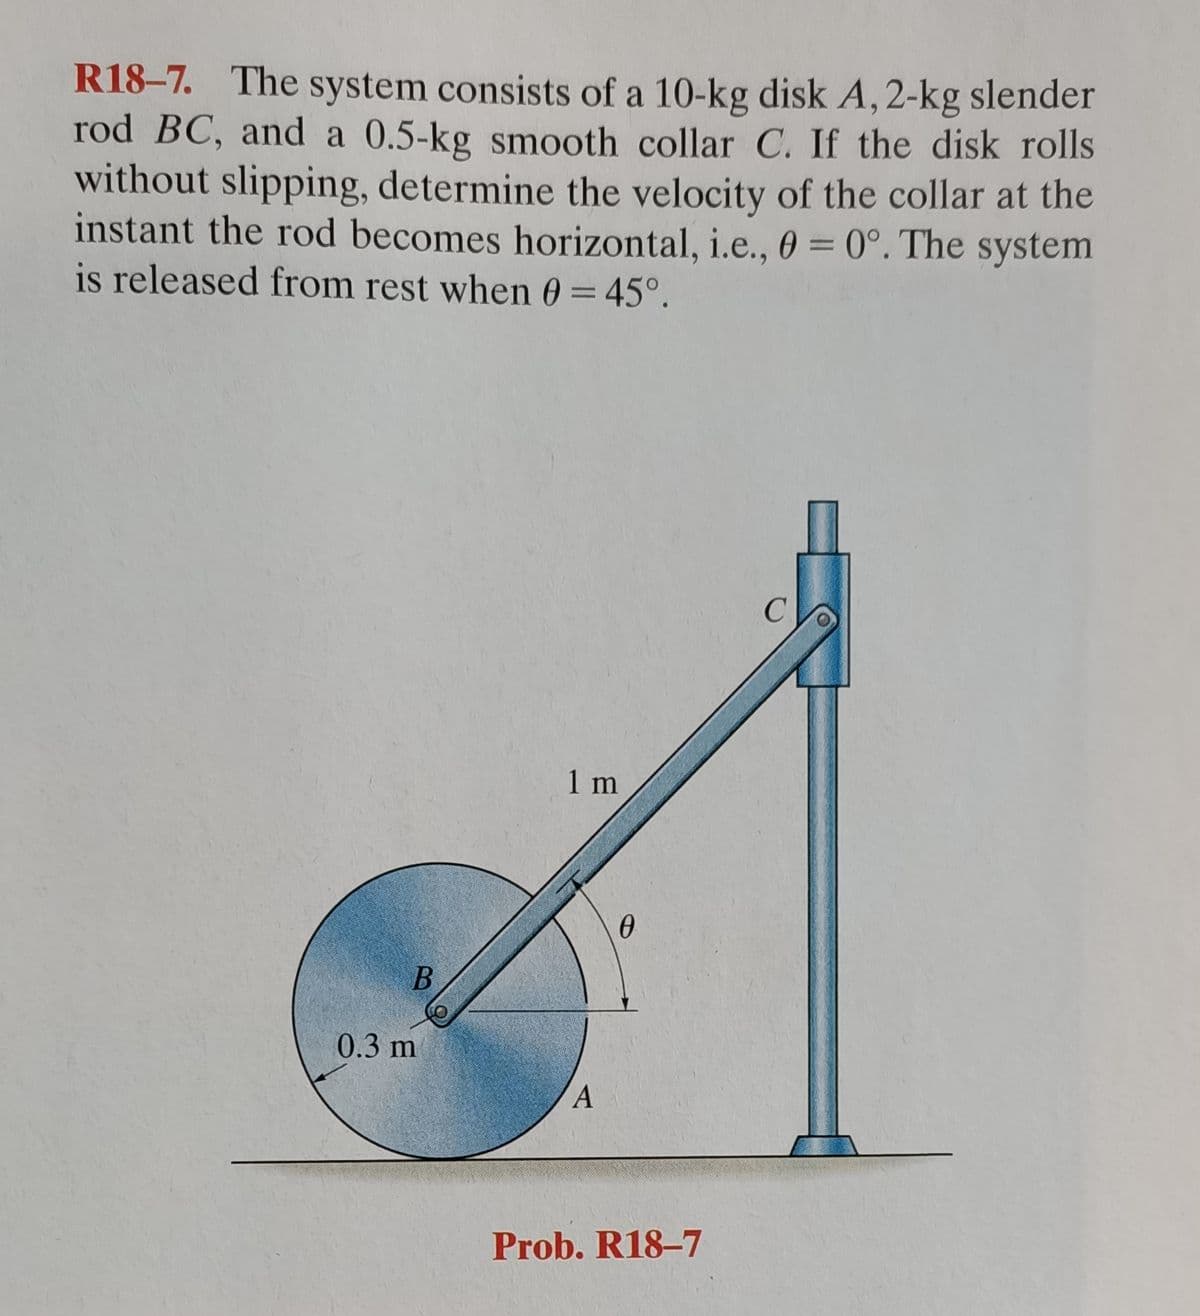 R18–7. The system consists of a 10-kg disk A,2-kg slender
rod BC, and a 0.5-kg smooth collar C. If the disk rolls
without slipping, determine the velocity of the collar at the
instant the rod becomes horizontal, i.e., 0 = 0°. The system
is released from rest when 0 = 45°.
1 m
0.3 m
Prob. R18–7
